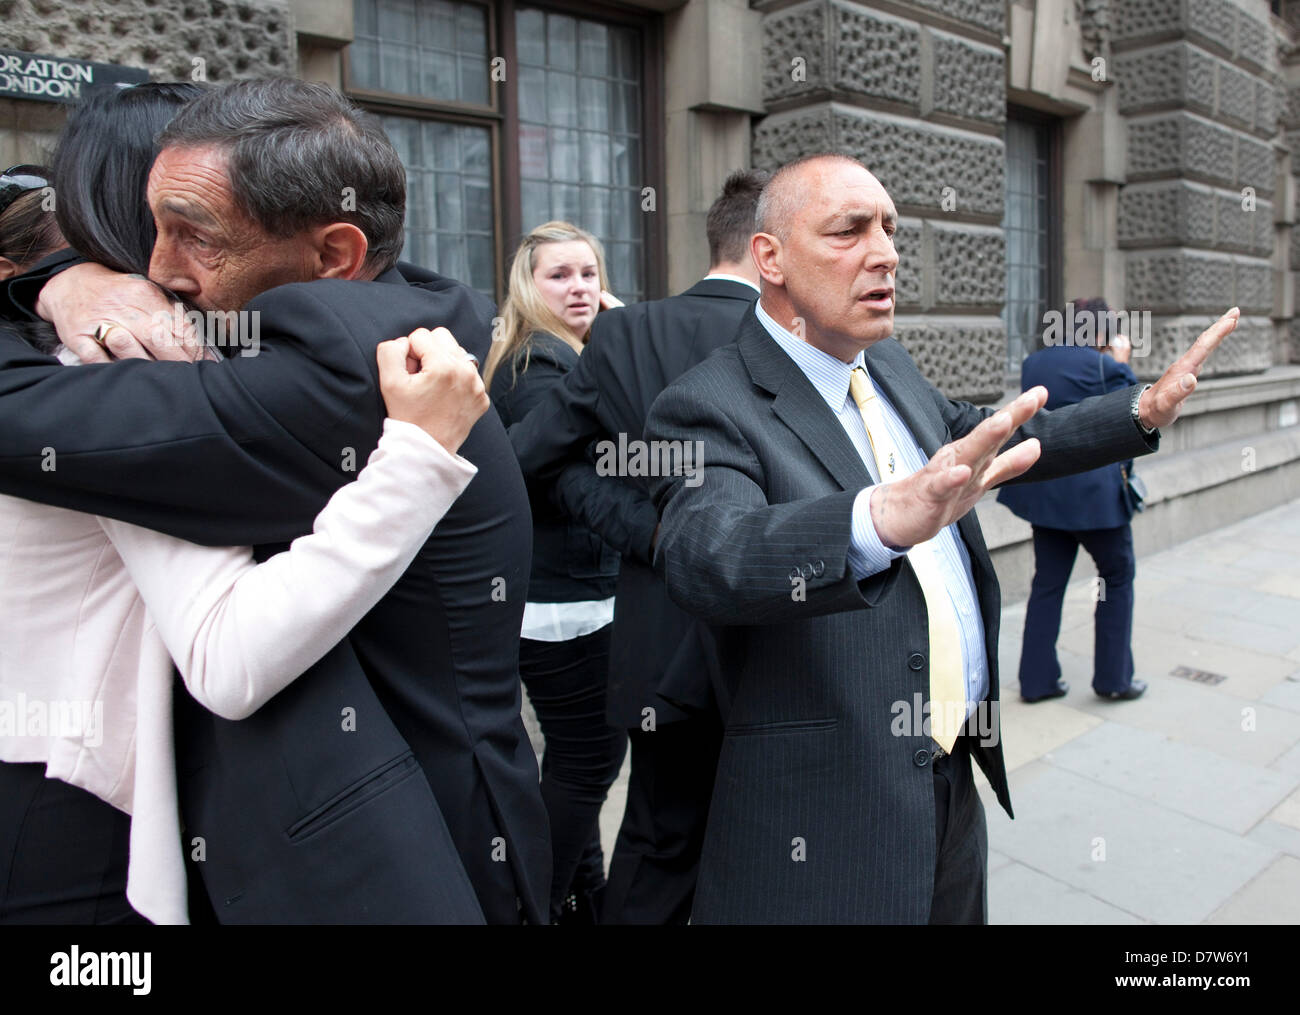 The Old Bailey, London, UK. 14.05.2013 Picture shows members of Steven Carter's family (far right with hands up) Stephen Carter, Grandfather of Tia,  leaving the Old Bailey after Stuart Hazell was jailed for life with a minimum term of 38 years after finally admitting the murder of schoolgirl Tia Sharp. Stock Photo